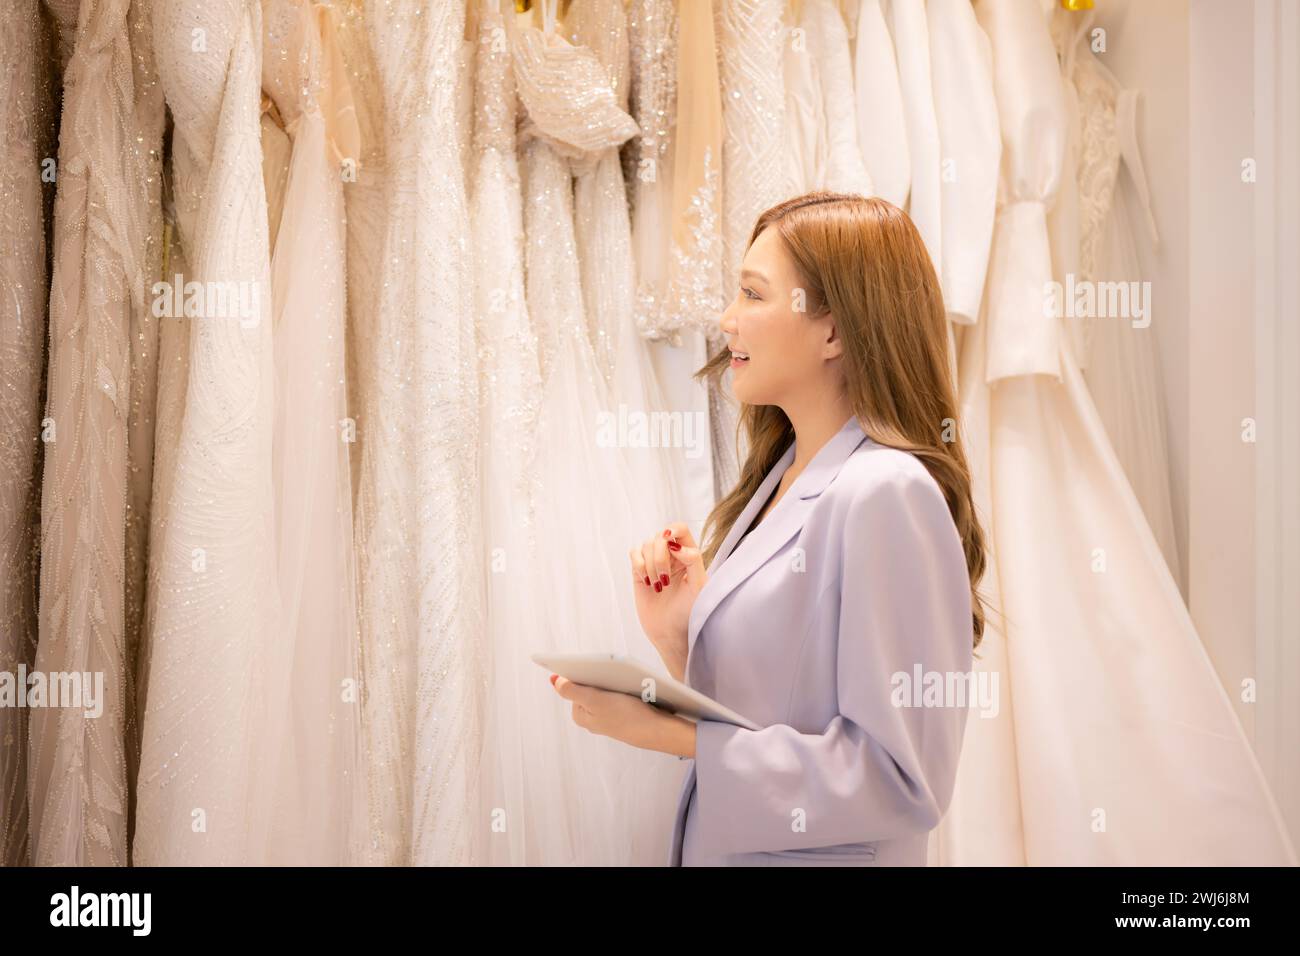 The shop owner is a designer and tailor. We are inspecting wedding dresses that are ready for the bride and groom to choose from Stock Photo